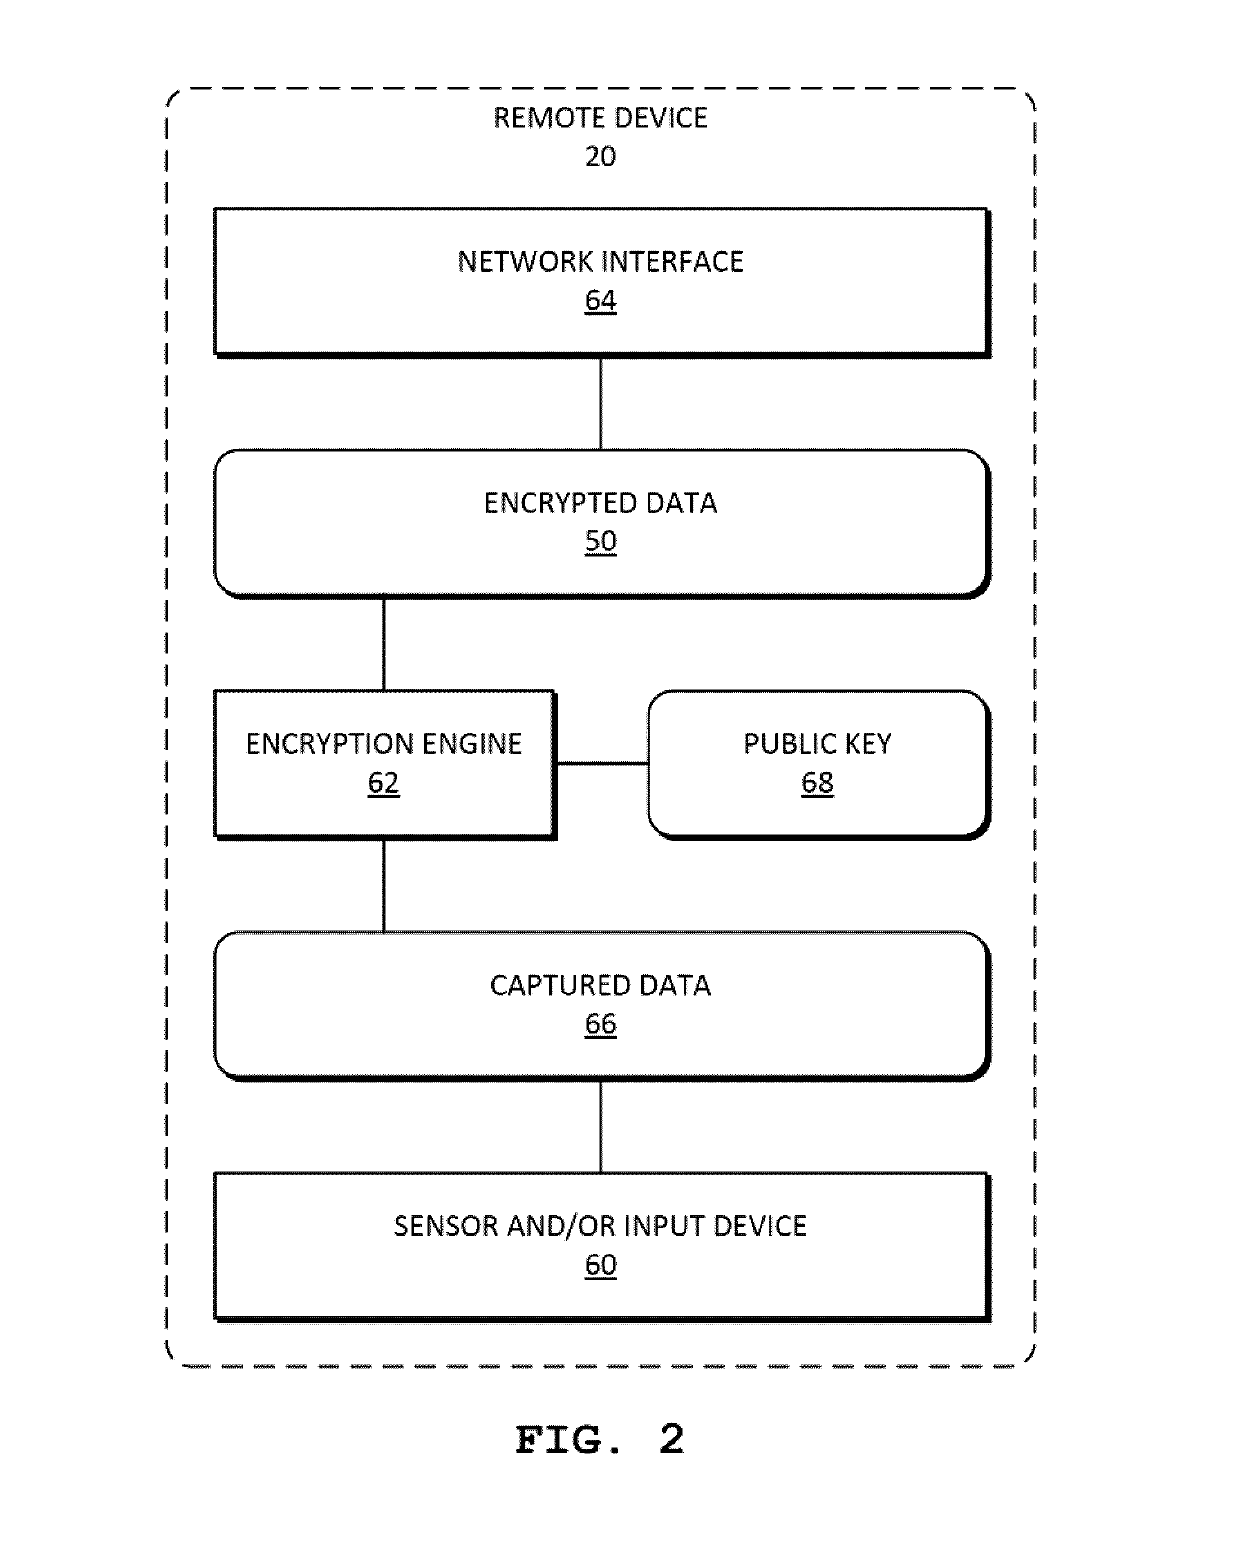 System and methods for validating and performing operations on homomorphically encrypted data